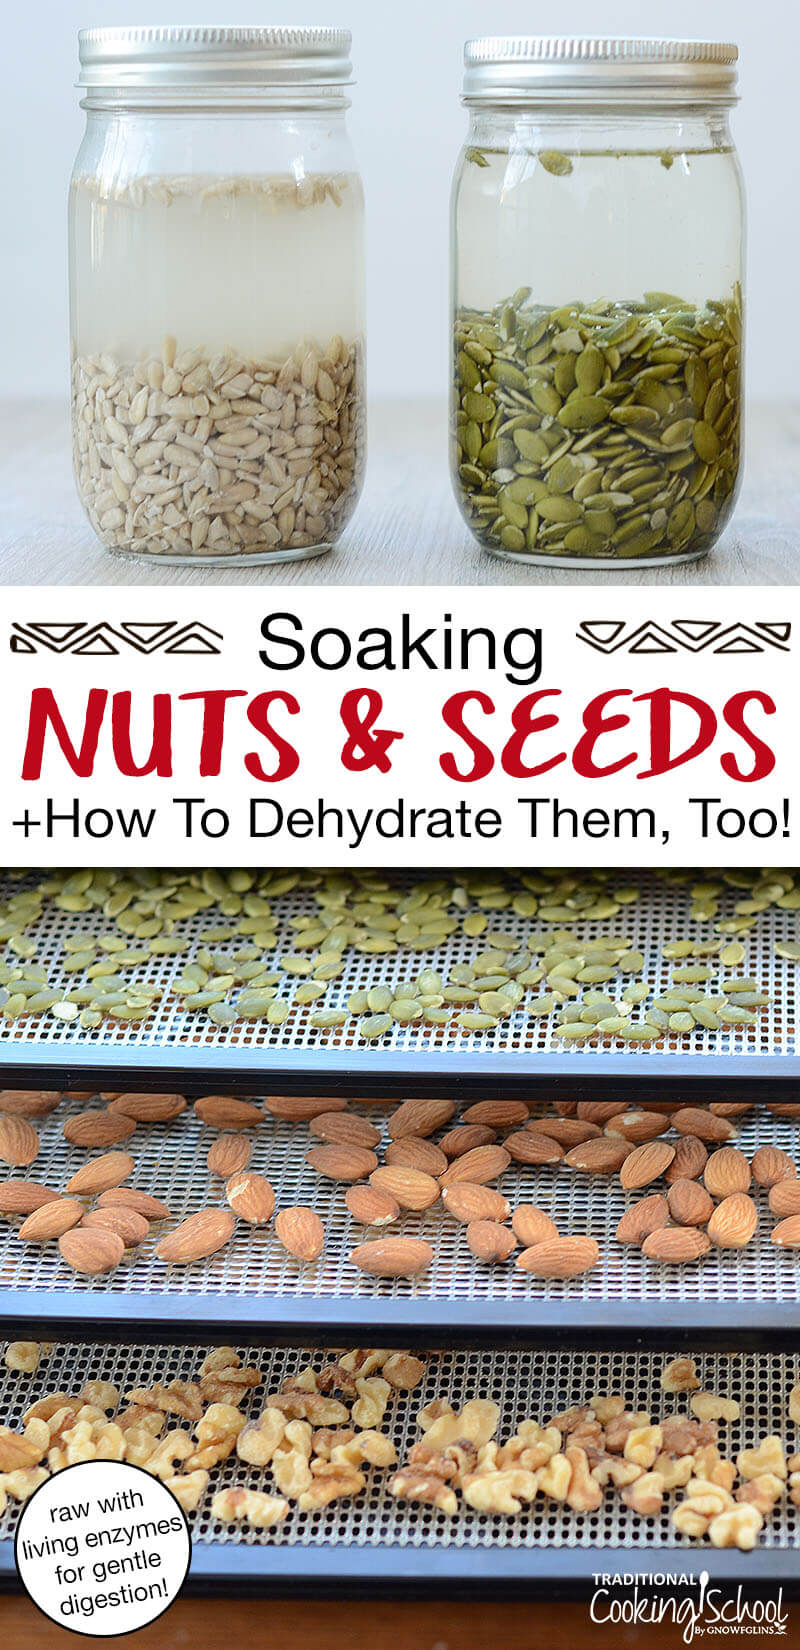 photo collage of sunflower and pumpkin seeds soaking in water, plus nuts and seeds on dehydrator trays, with text overlay: "Soaking Nuts & Seeds + How To Dehydrate Them, Too! (raw with living enzymes for gentle digestion)"